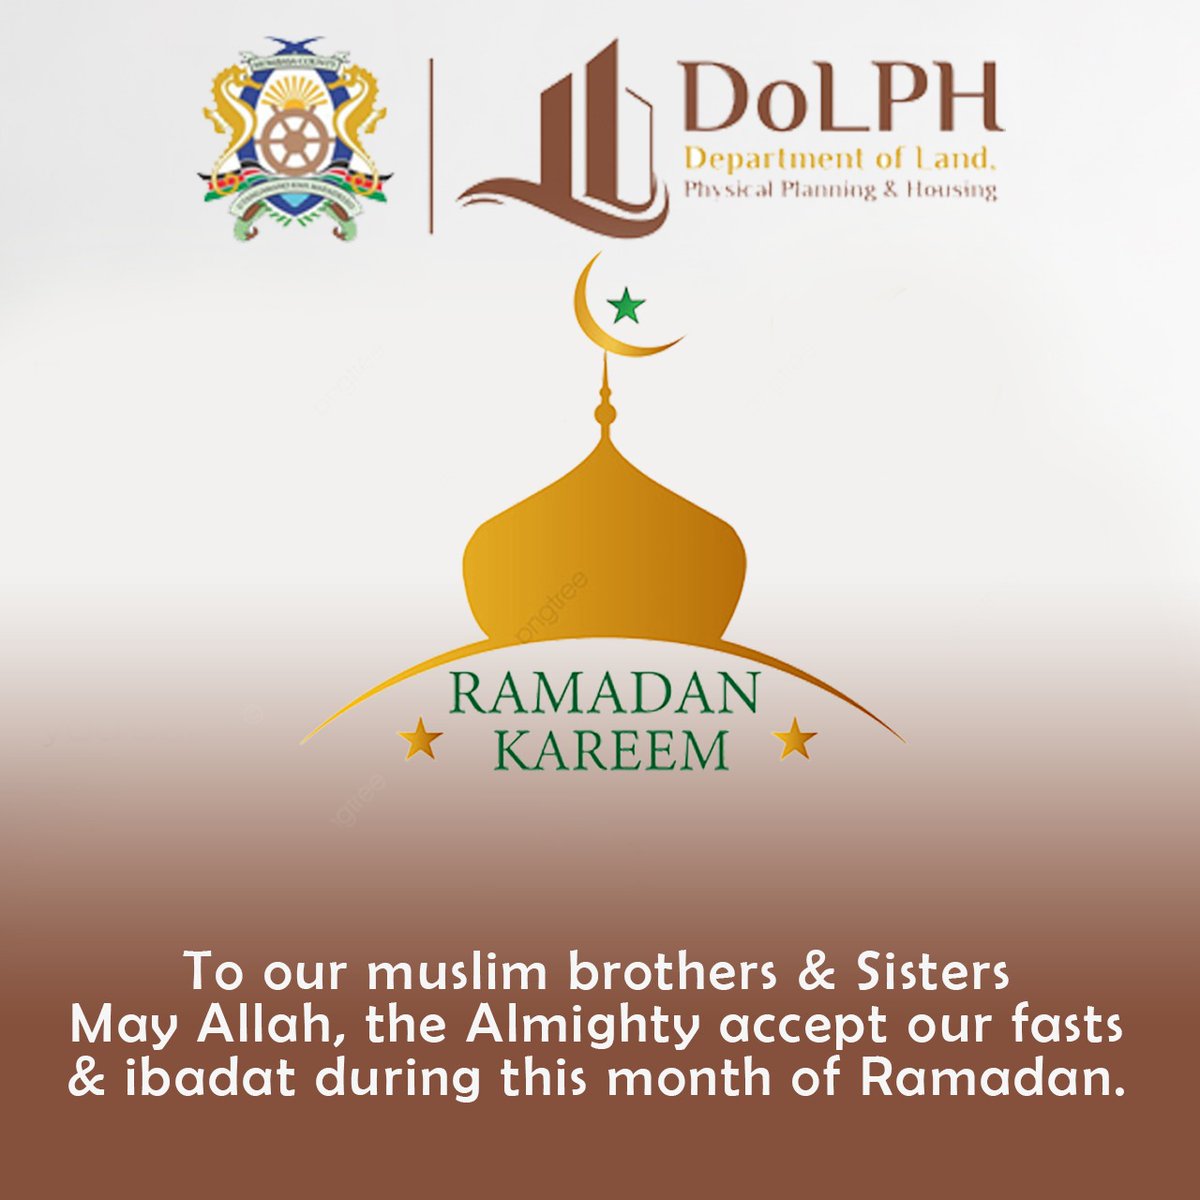 To all our muslim brothers and sisters, during this ramadhan, may Allah accept your fast and grant you and your loved ones the desires of your hearts. Ramadan Mubarak. #ramadan2022 #RamadanMubarak #Dolph #mombasacounty